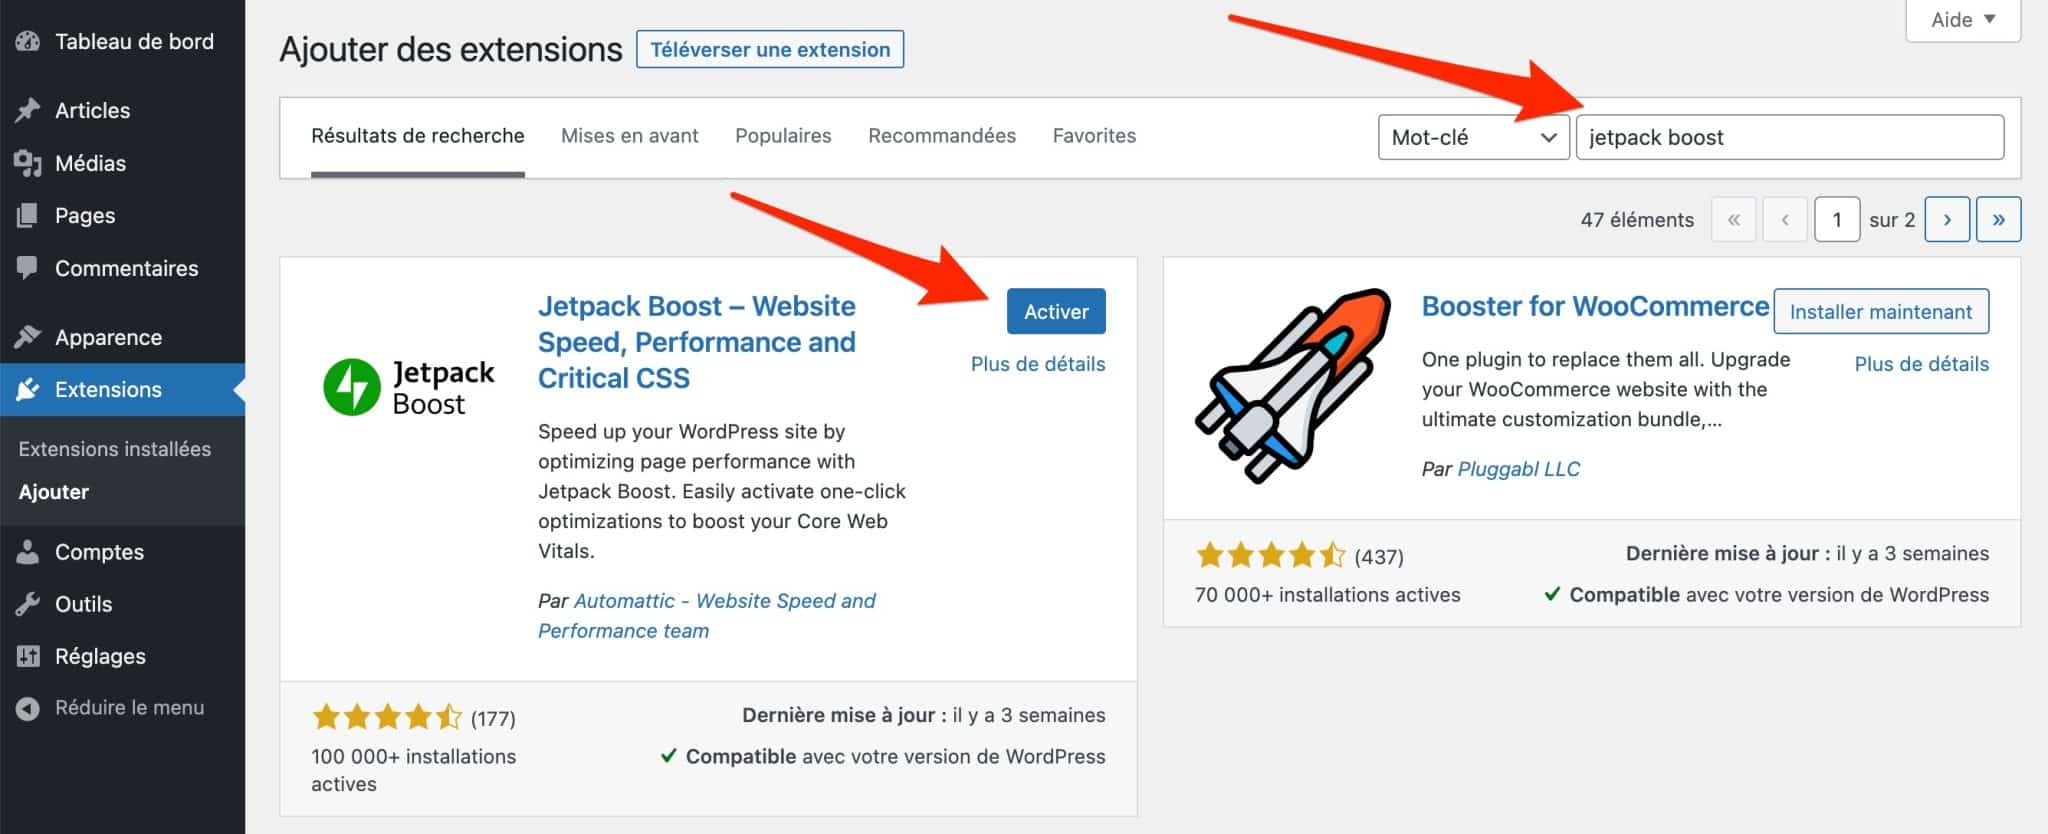 Installation and activation of the Jetpack Boost extension on the WordPress back-office.